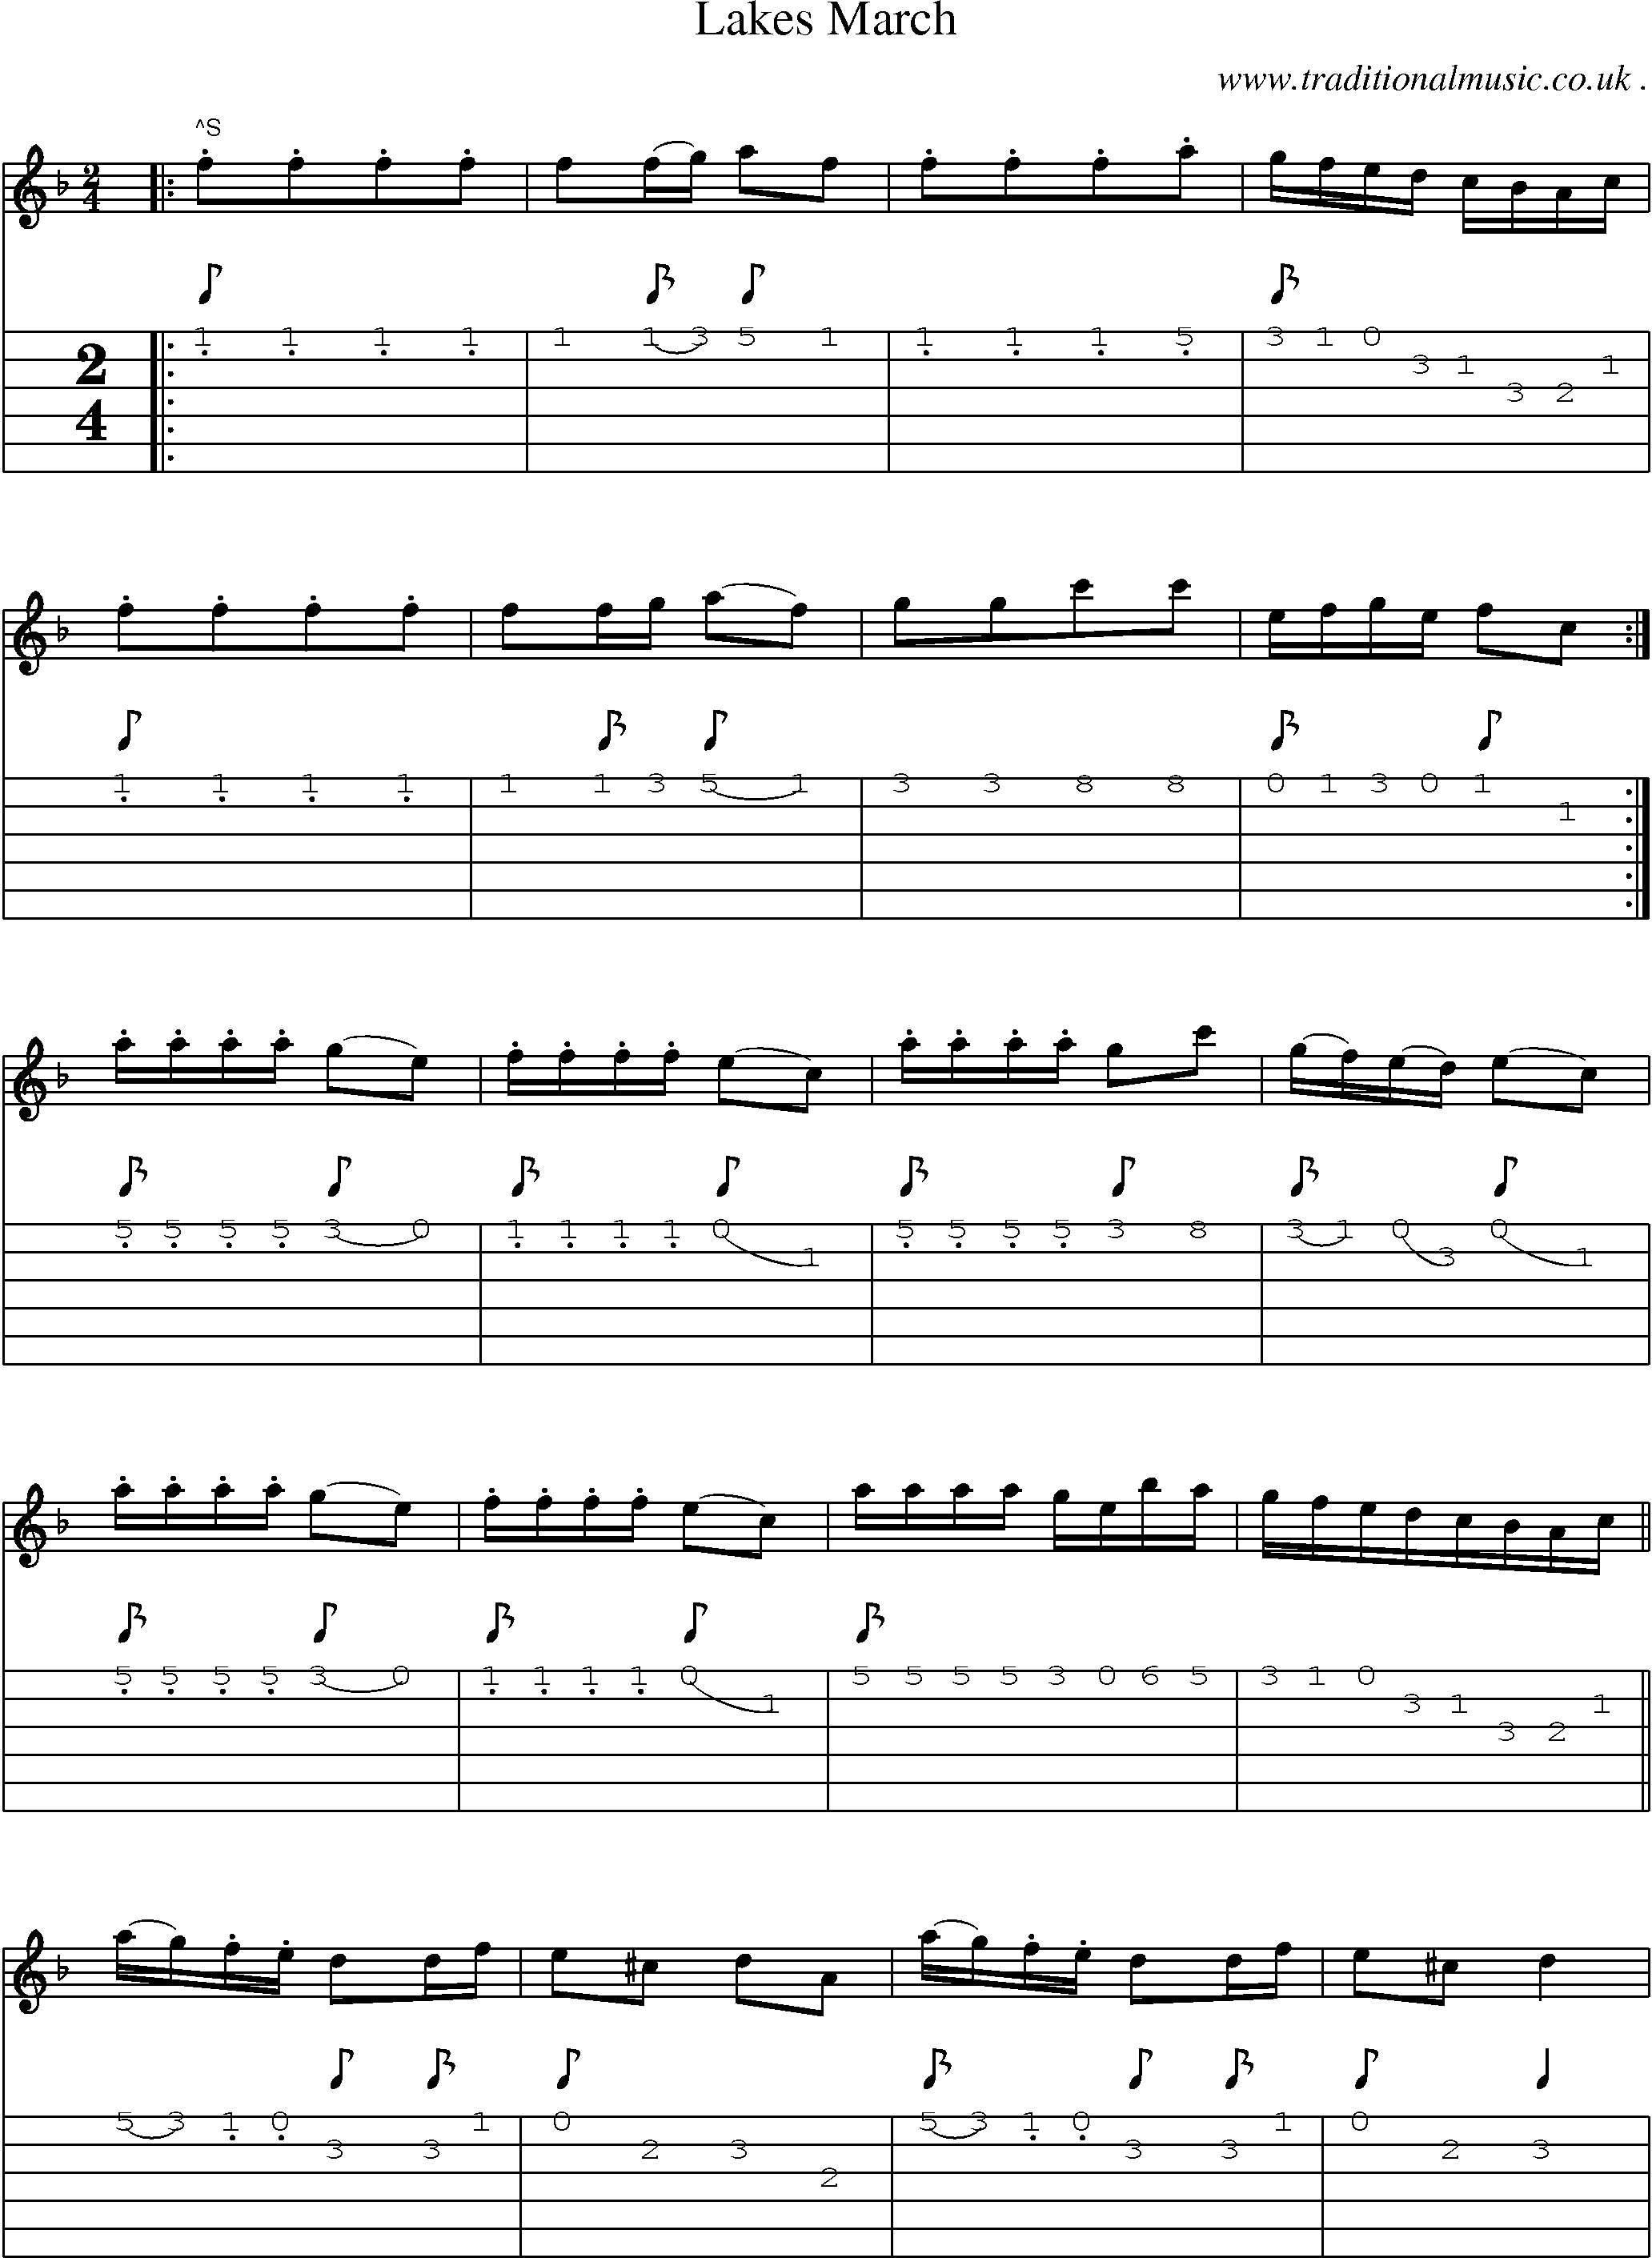 Sheet-Music and Guitar Tabs for Lakes March